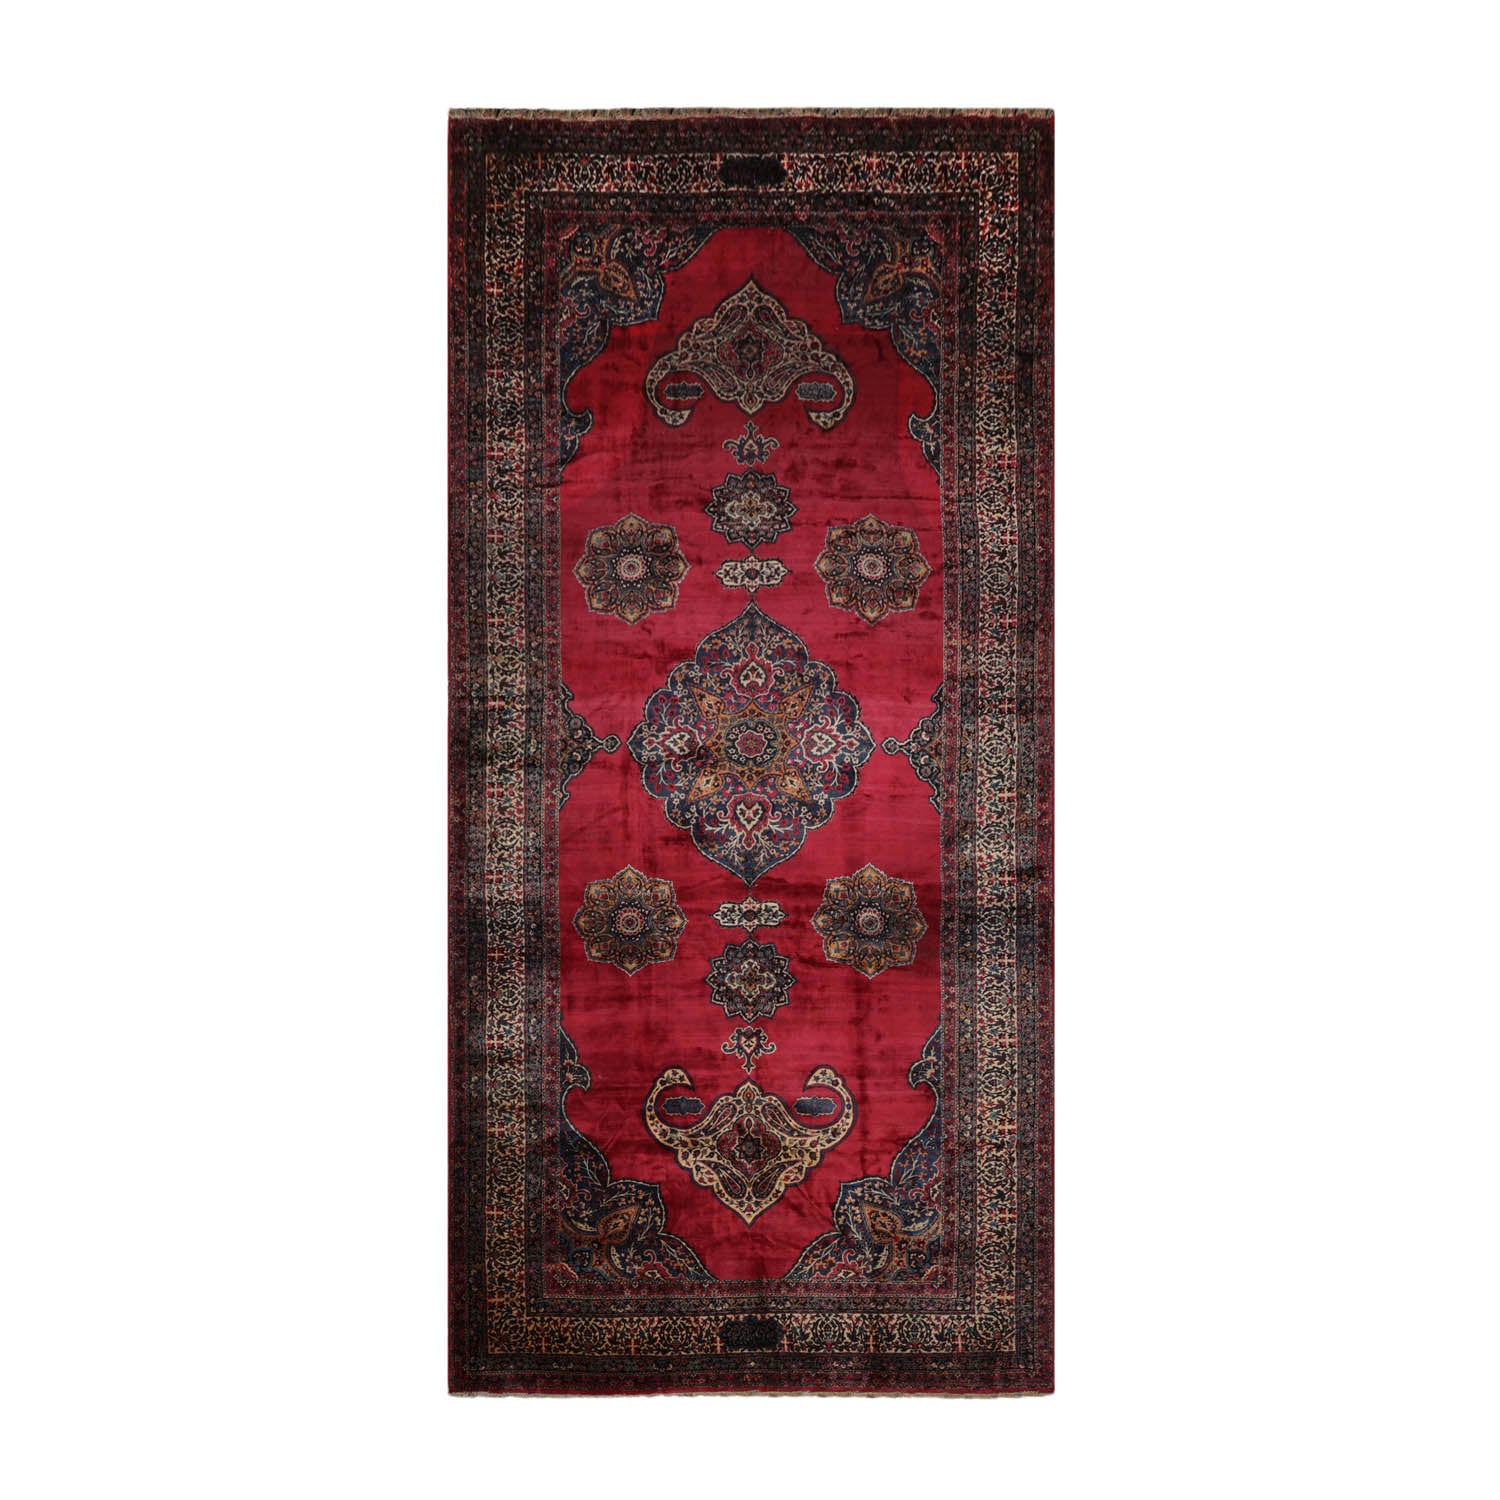 Wenham Palace Hand Knotted Persian Wool and Silk Antique 300 KPSI Traditional  Oriental Area Rug Antique Rose,Ivory Color